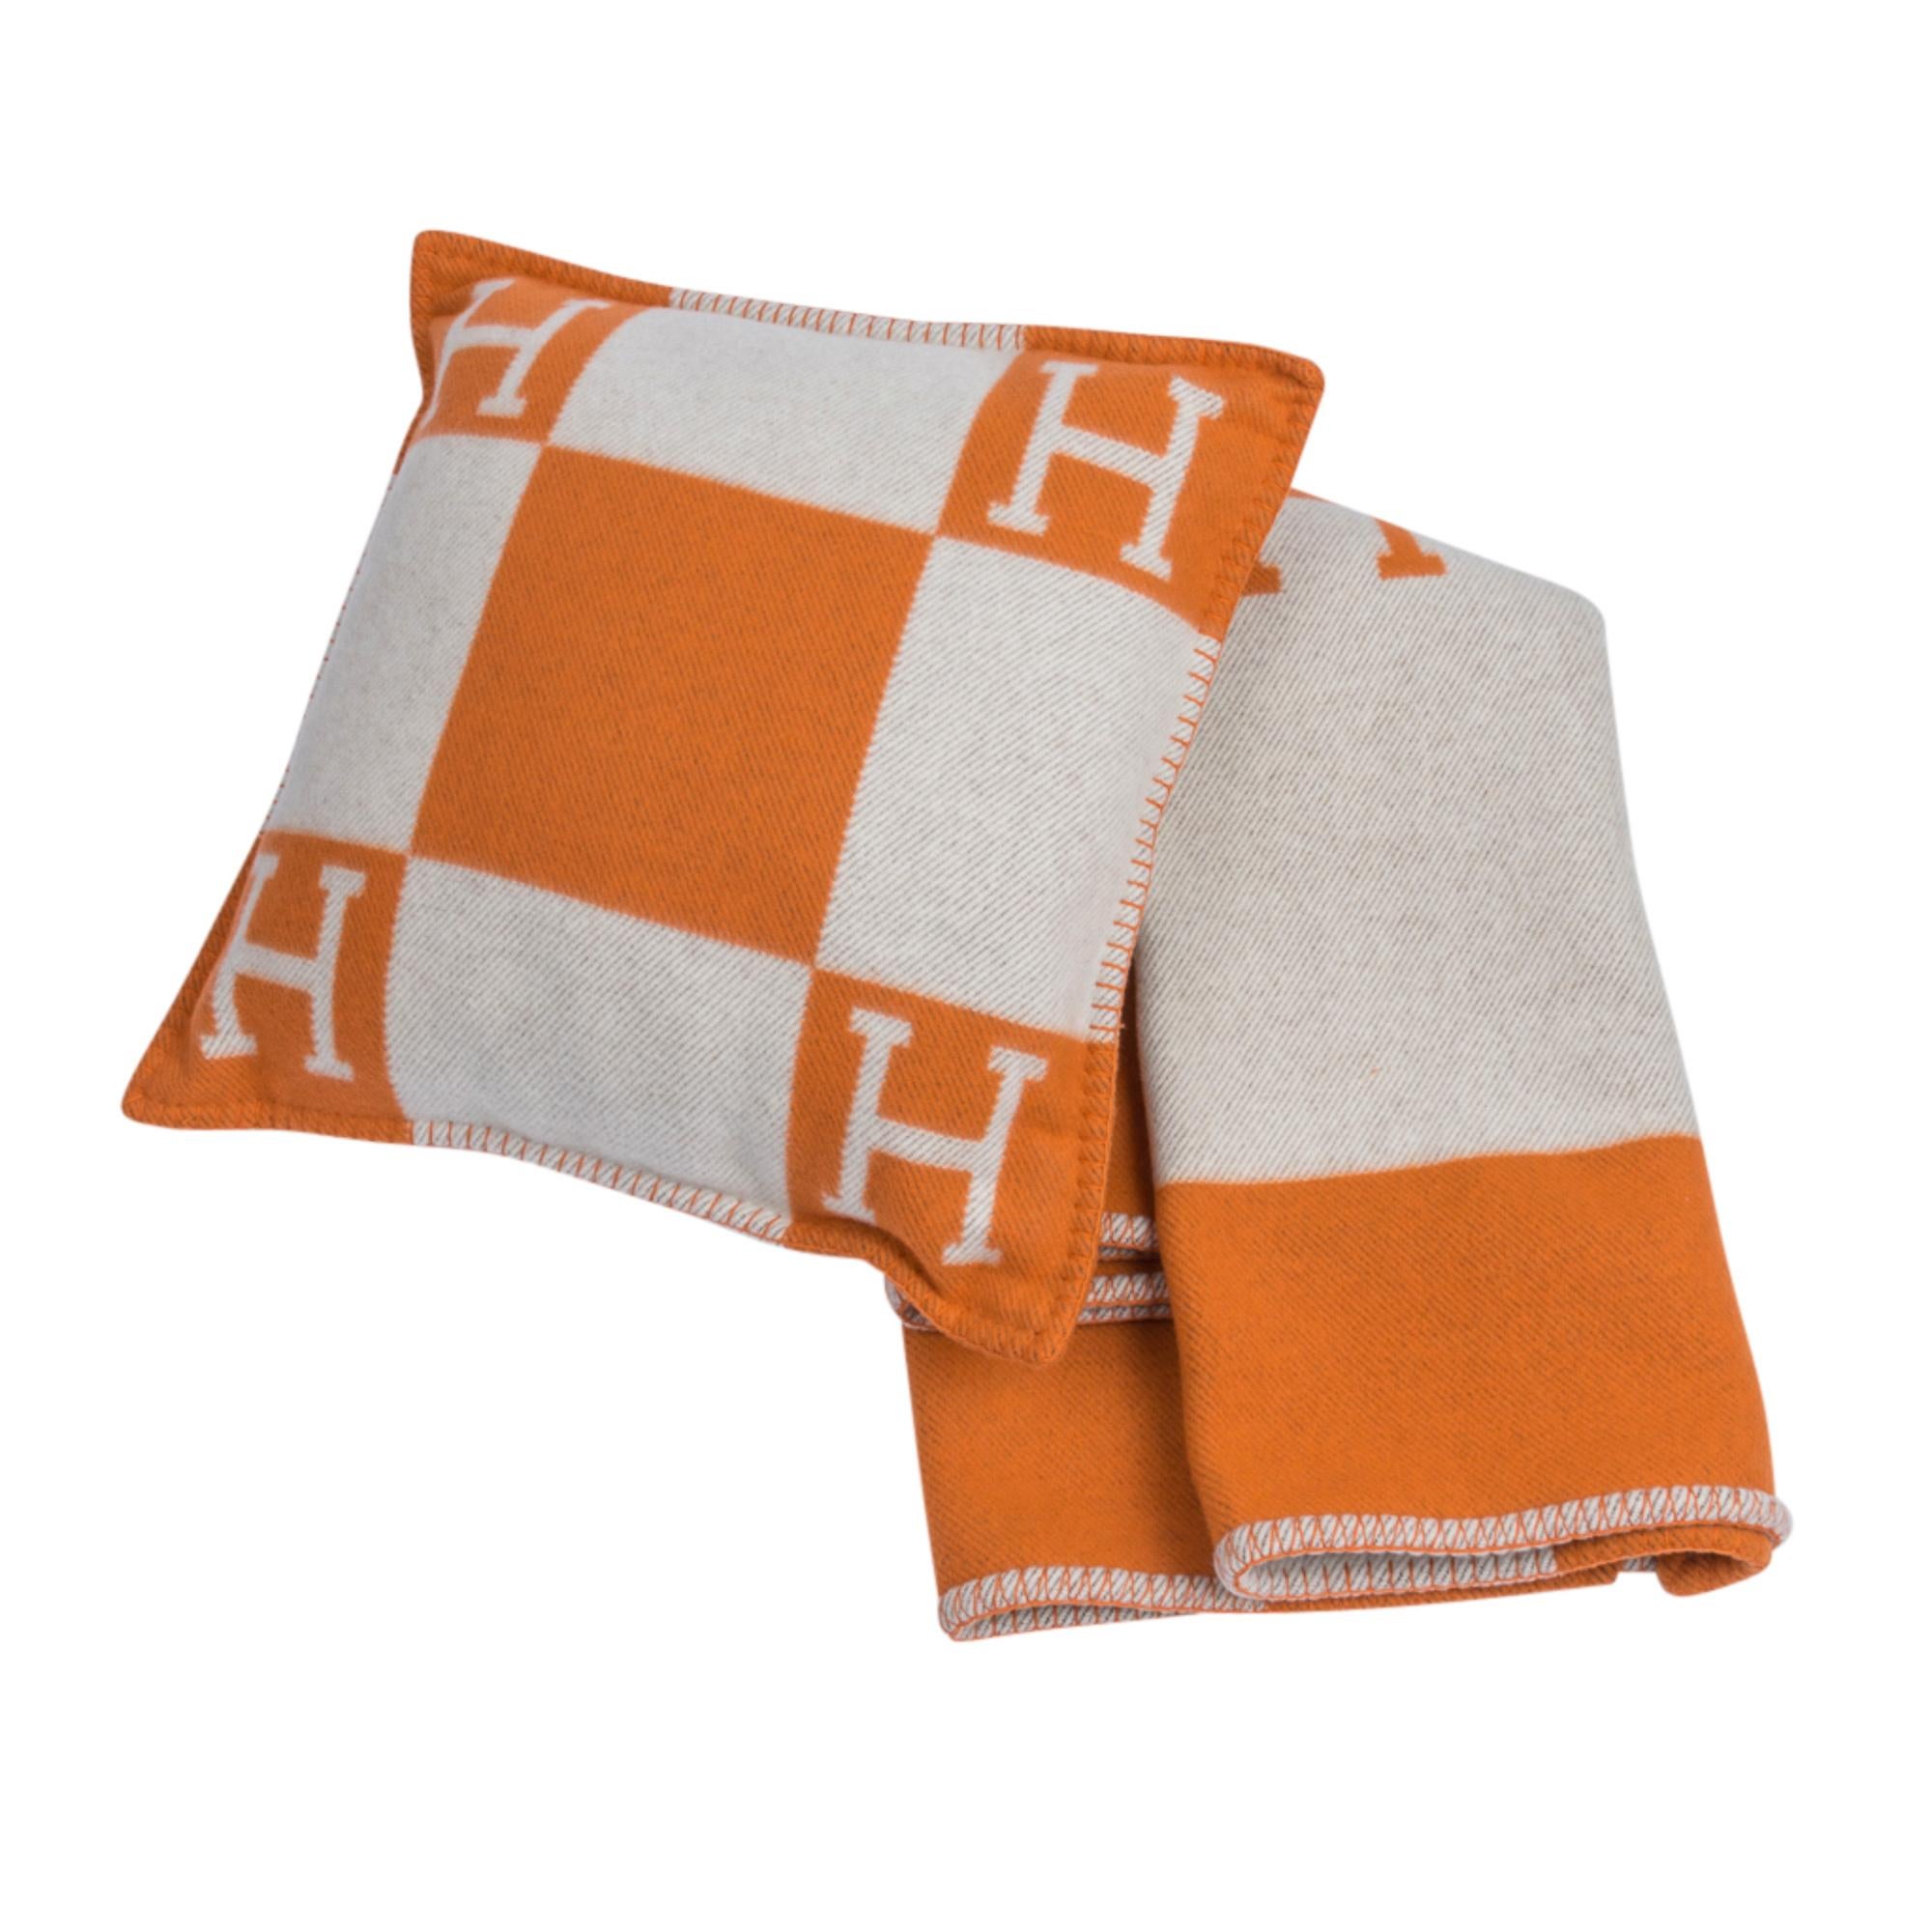 Mightychic offers an Hermes classic PM Avalon I signature H pillows featured in Orange.
The removable cover is created from 85% Wool and 15% cashmere and has whip stitch edges.
New or Pristine Store Fresh Condition.  
Comes with sleeper.
final